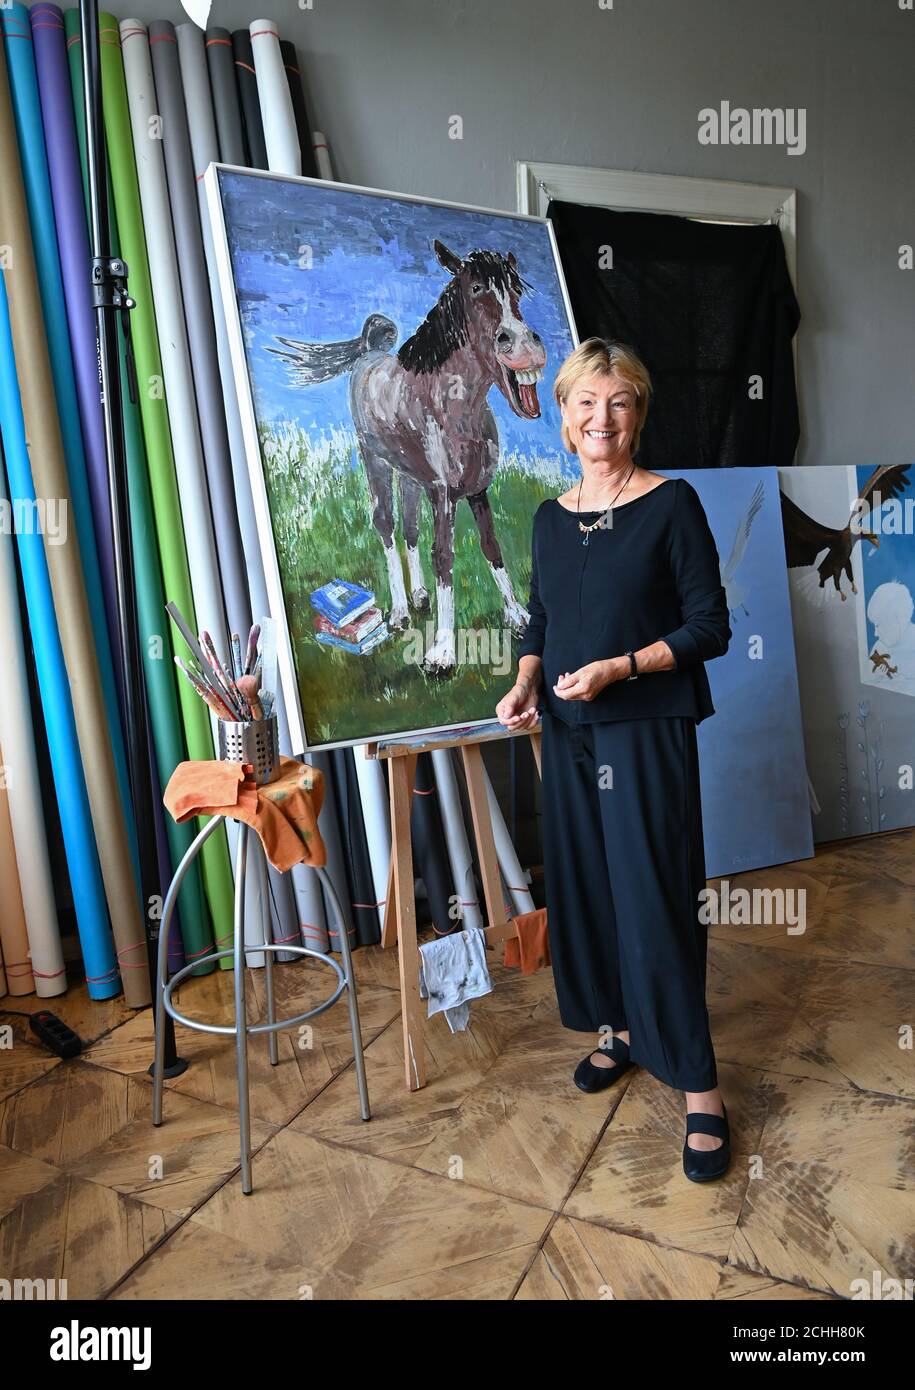 11 September 2020, Berlin: The painter Anne Dohrenkamp, wife of Jürgen von der Lippe, at a photo session. Her works will be shown in the exhibition AENO Painting and Photography in the Galerie Hotel Mond Fine Arts from 24.09.2020 to 25.10.2020 together with photos by the Berlin photographer Andre Kowalski. Anne Dohrenkamp's pictures reflect the individual stages of her artistic development, which has been particularly intense in recent years. In her versatility, she shows detailed, elaborate l pictures in layer technique, spontaneous watercolours, collages, caricature-like, overdrawn animal mo Stock Photo